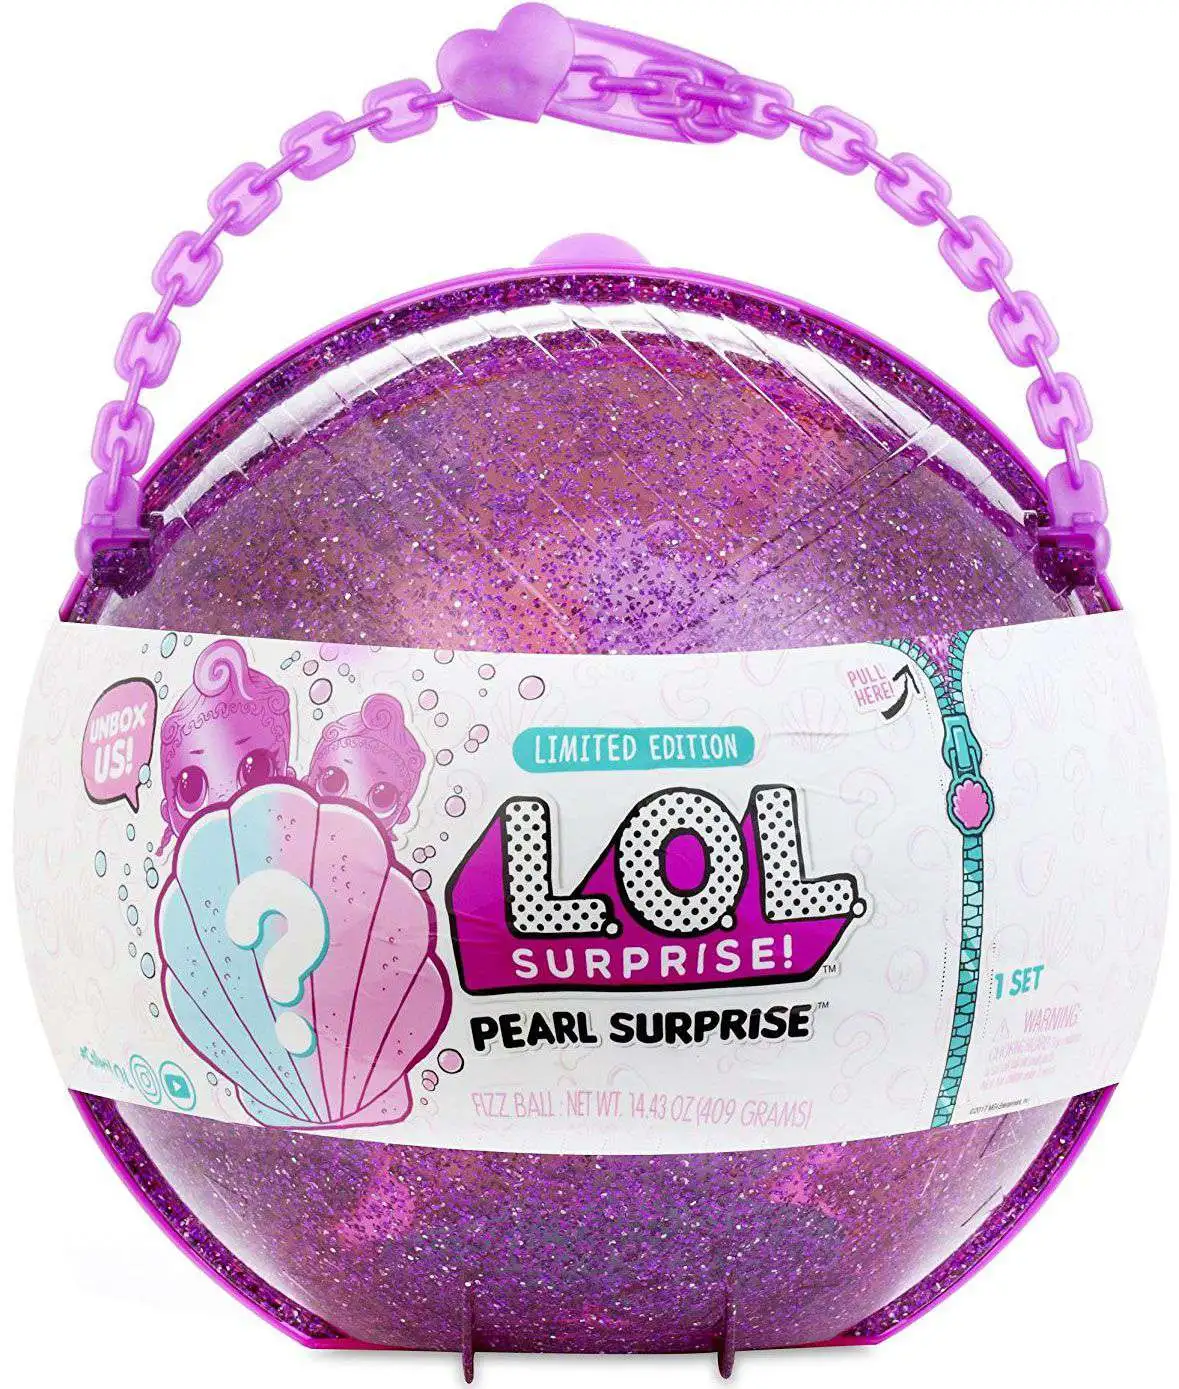 Doll Big LOL Pearl Surprise Teal 2018 Limited Edition New Release Mermaid L.O.L 